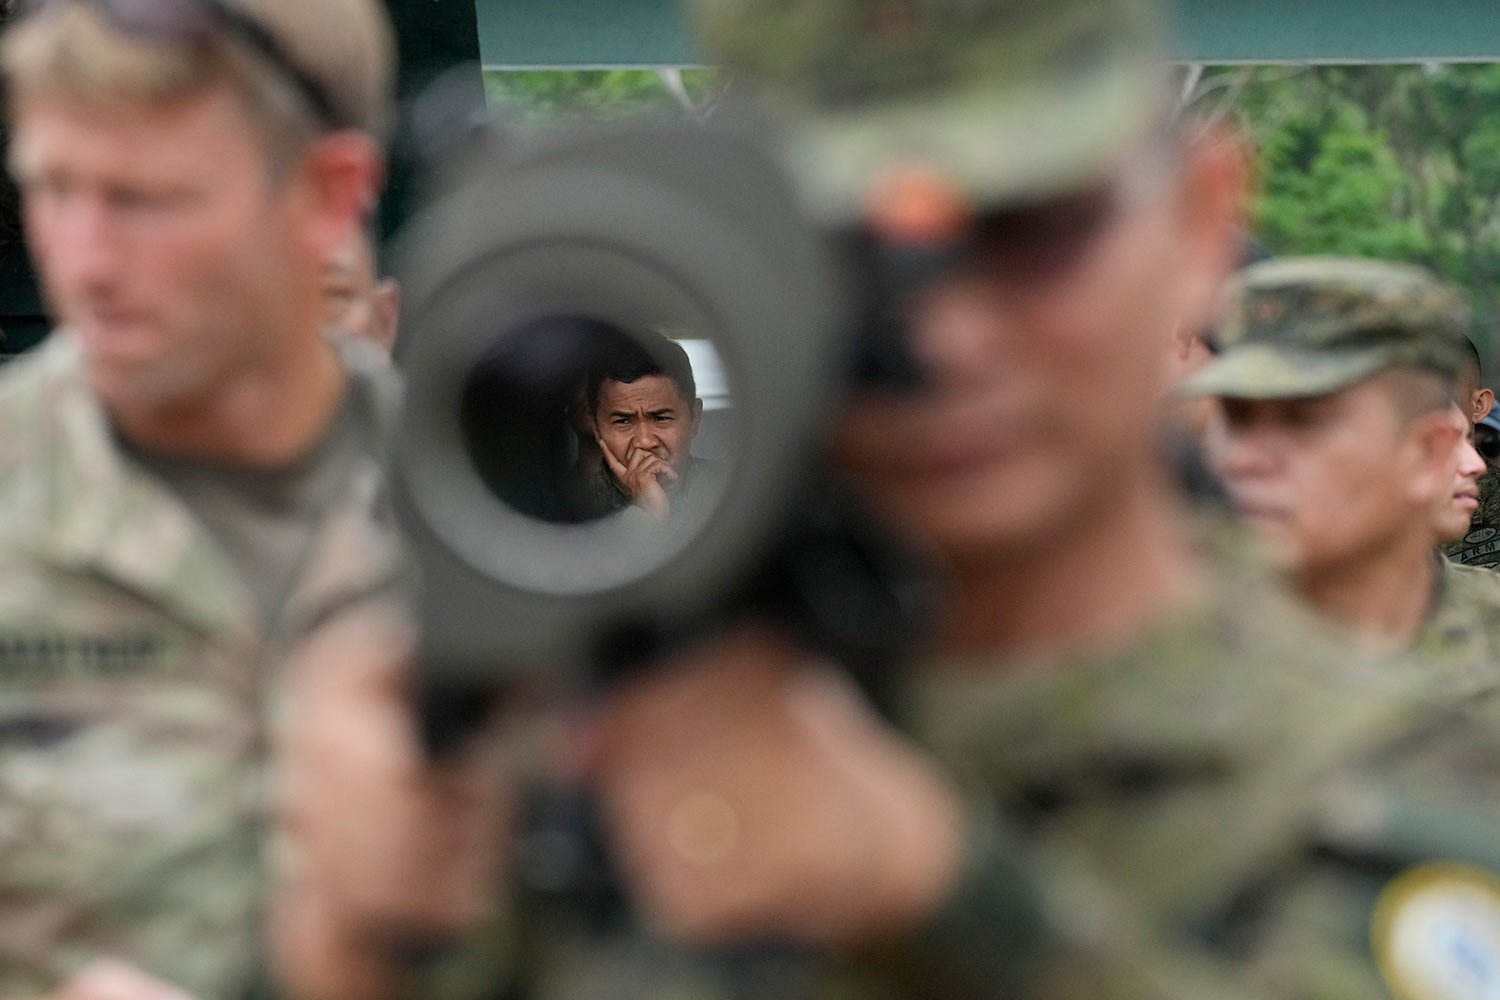  A Filipino soldier is seen through the barrel of a Carl Gustaf recoilless anti-tank rifle during a joint military exercise between the U.S, and Philippines called "Balikatan," Tagalog for shoulder-to-shoulder at Fort Magsaysay, Nueva Ecija province,